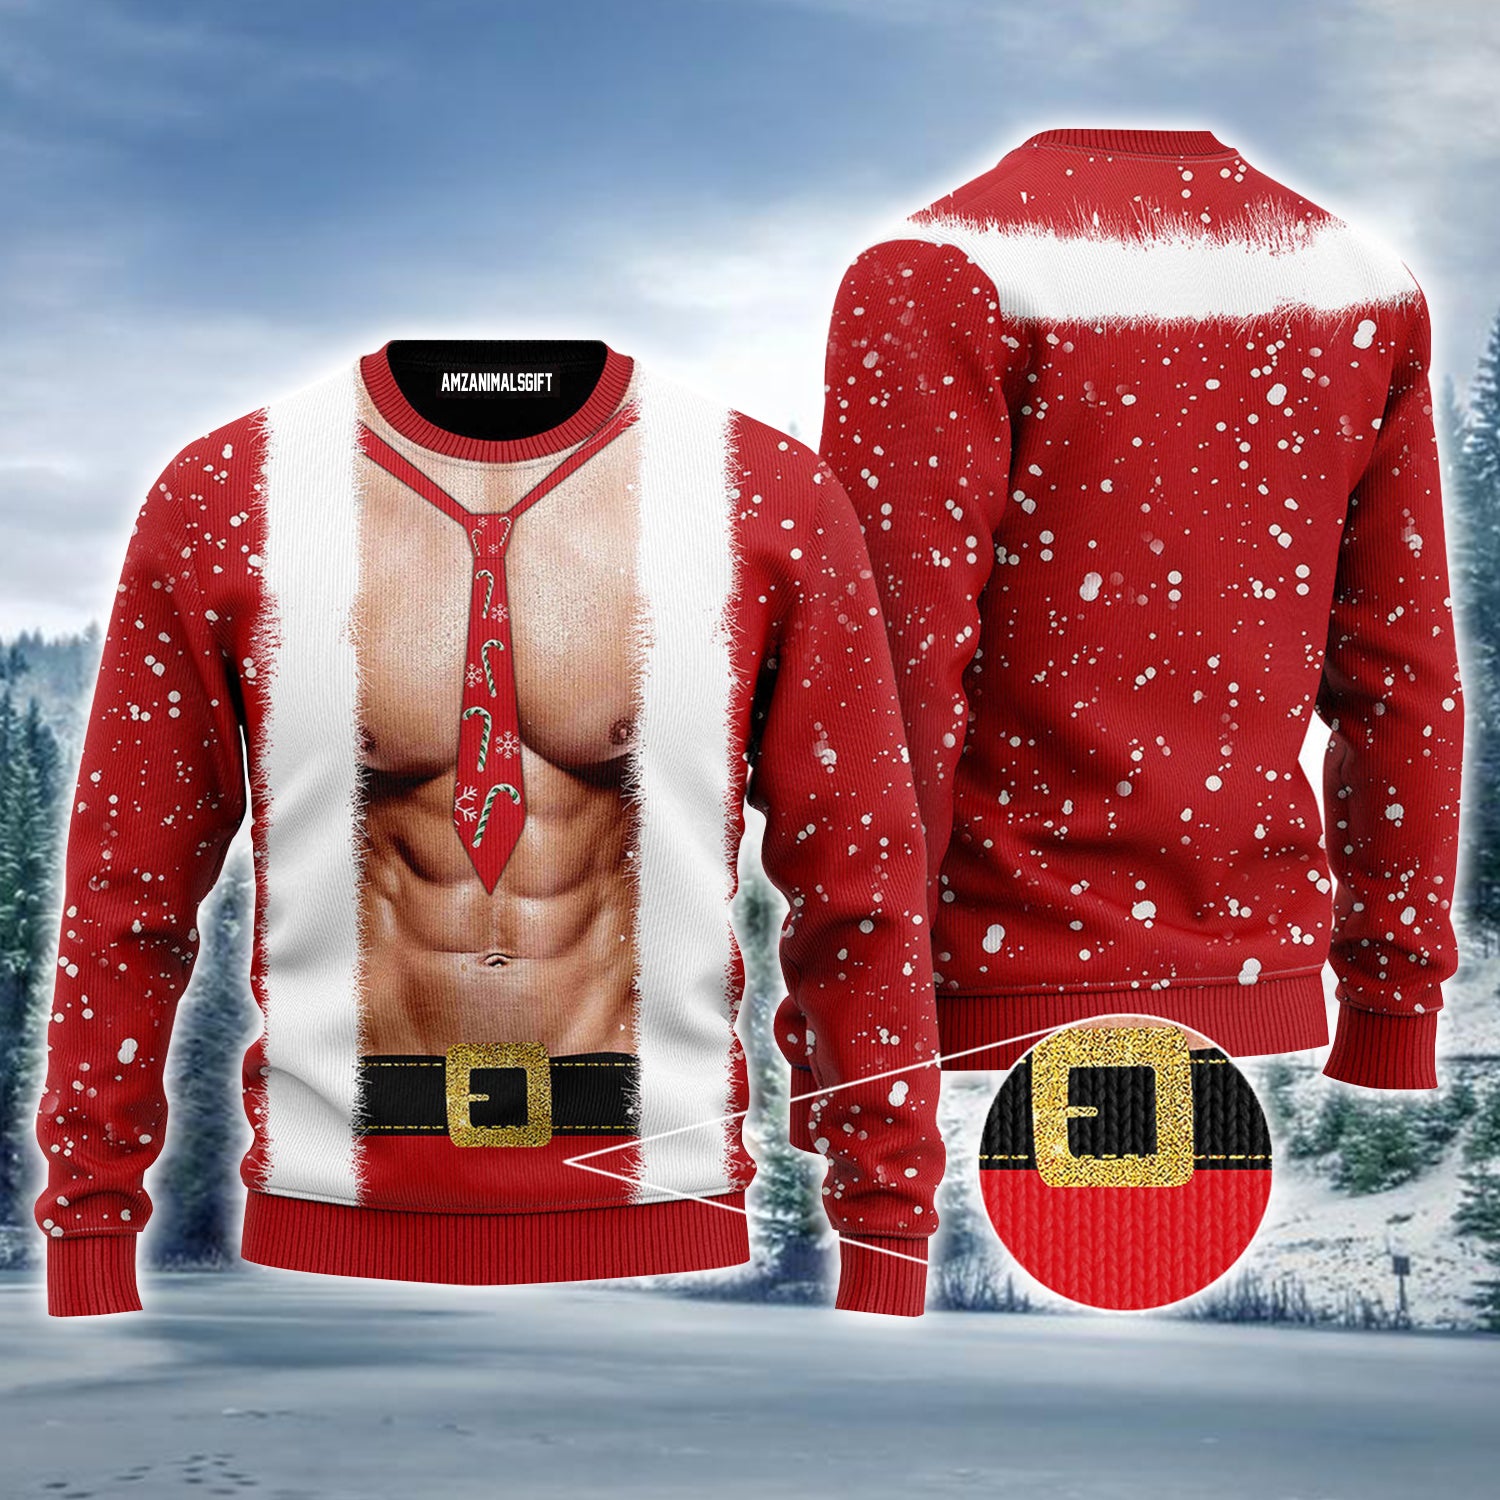 Santa Body Ugly Christmas Sweater, Snowflakes Christmas Ugly Sweater For Men & Women - Perfect Gift For Christmas, Friends, Family